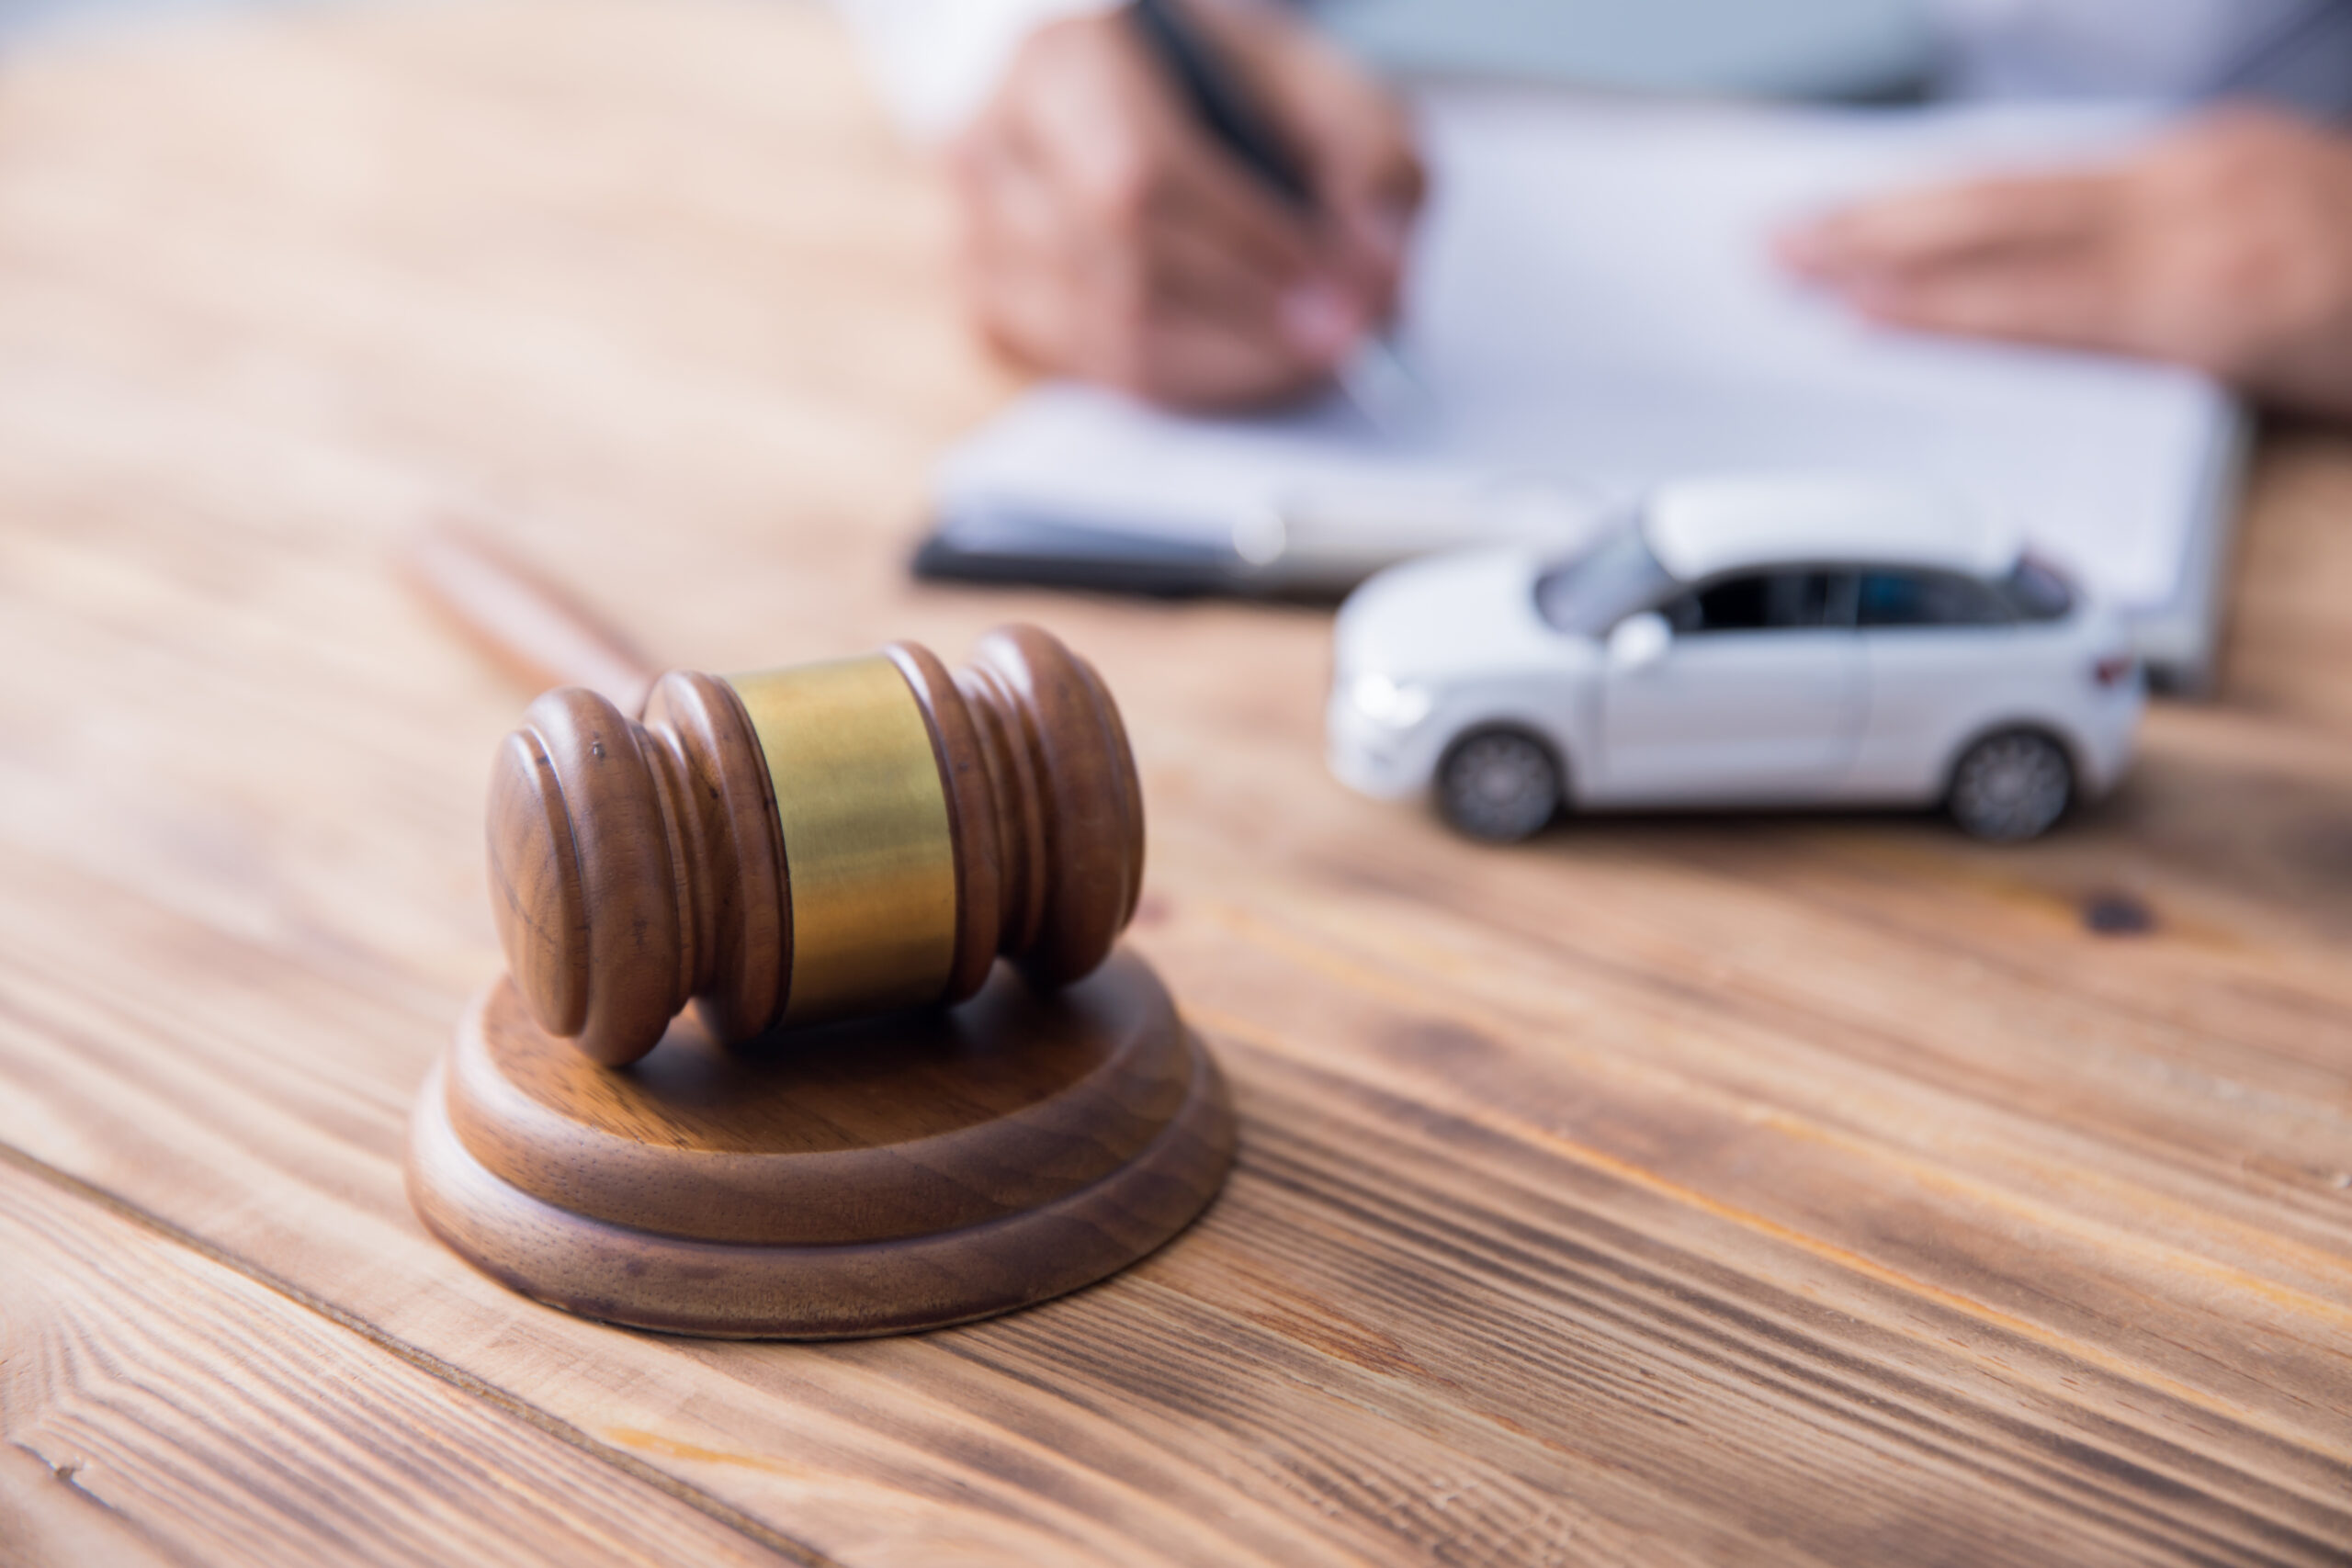 What Can a Lawyer Do for You After a Car Accident